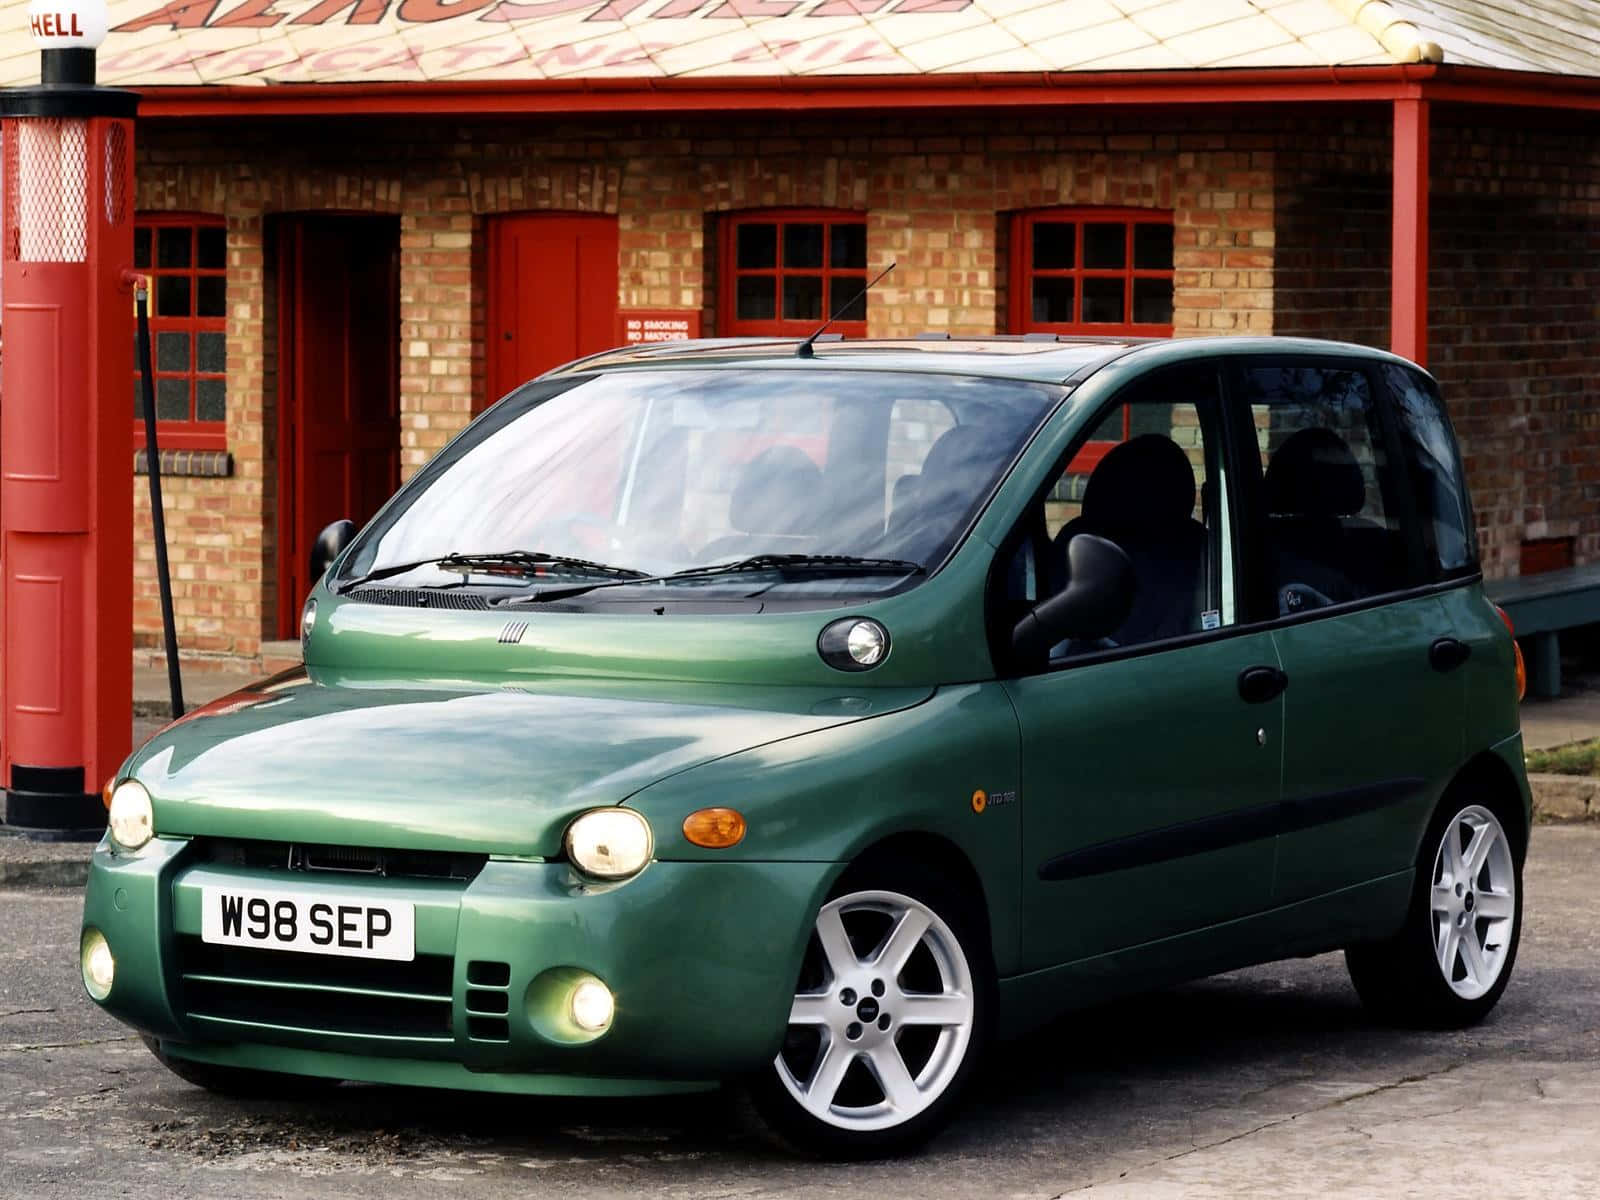 Caption: A Pristine Fiat Multipla Parked In The Open Wallpaper